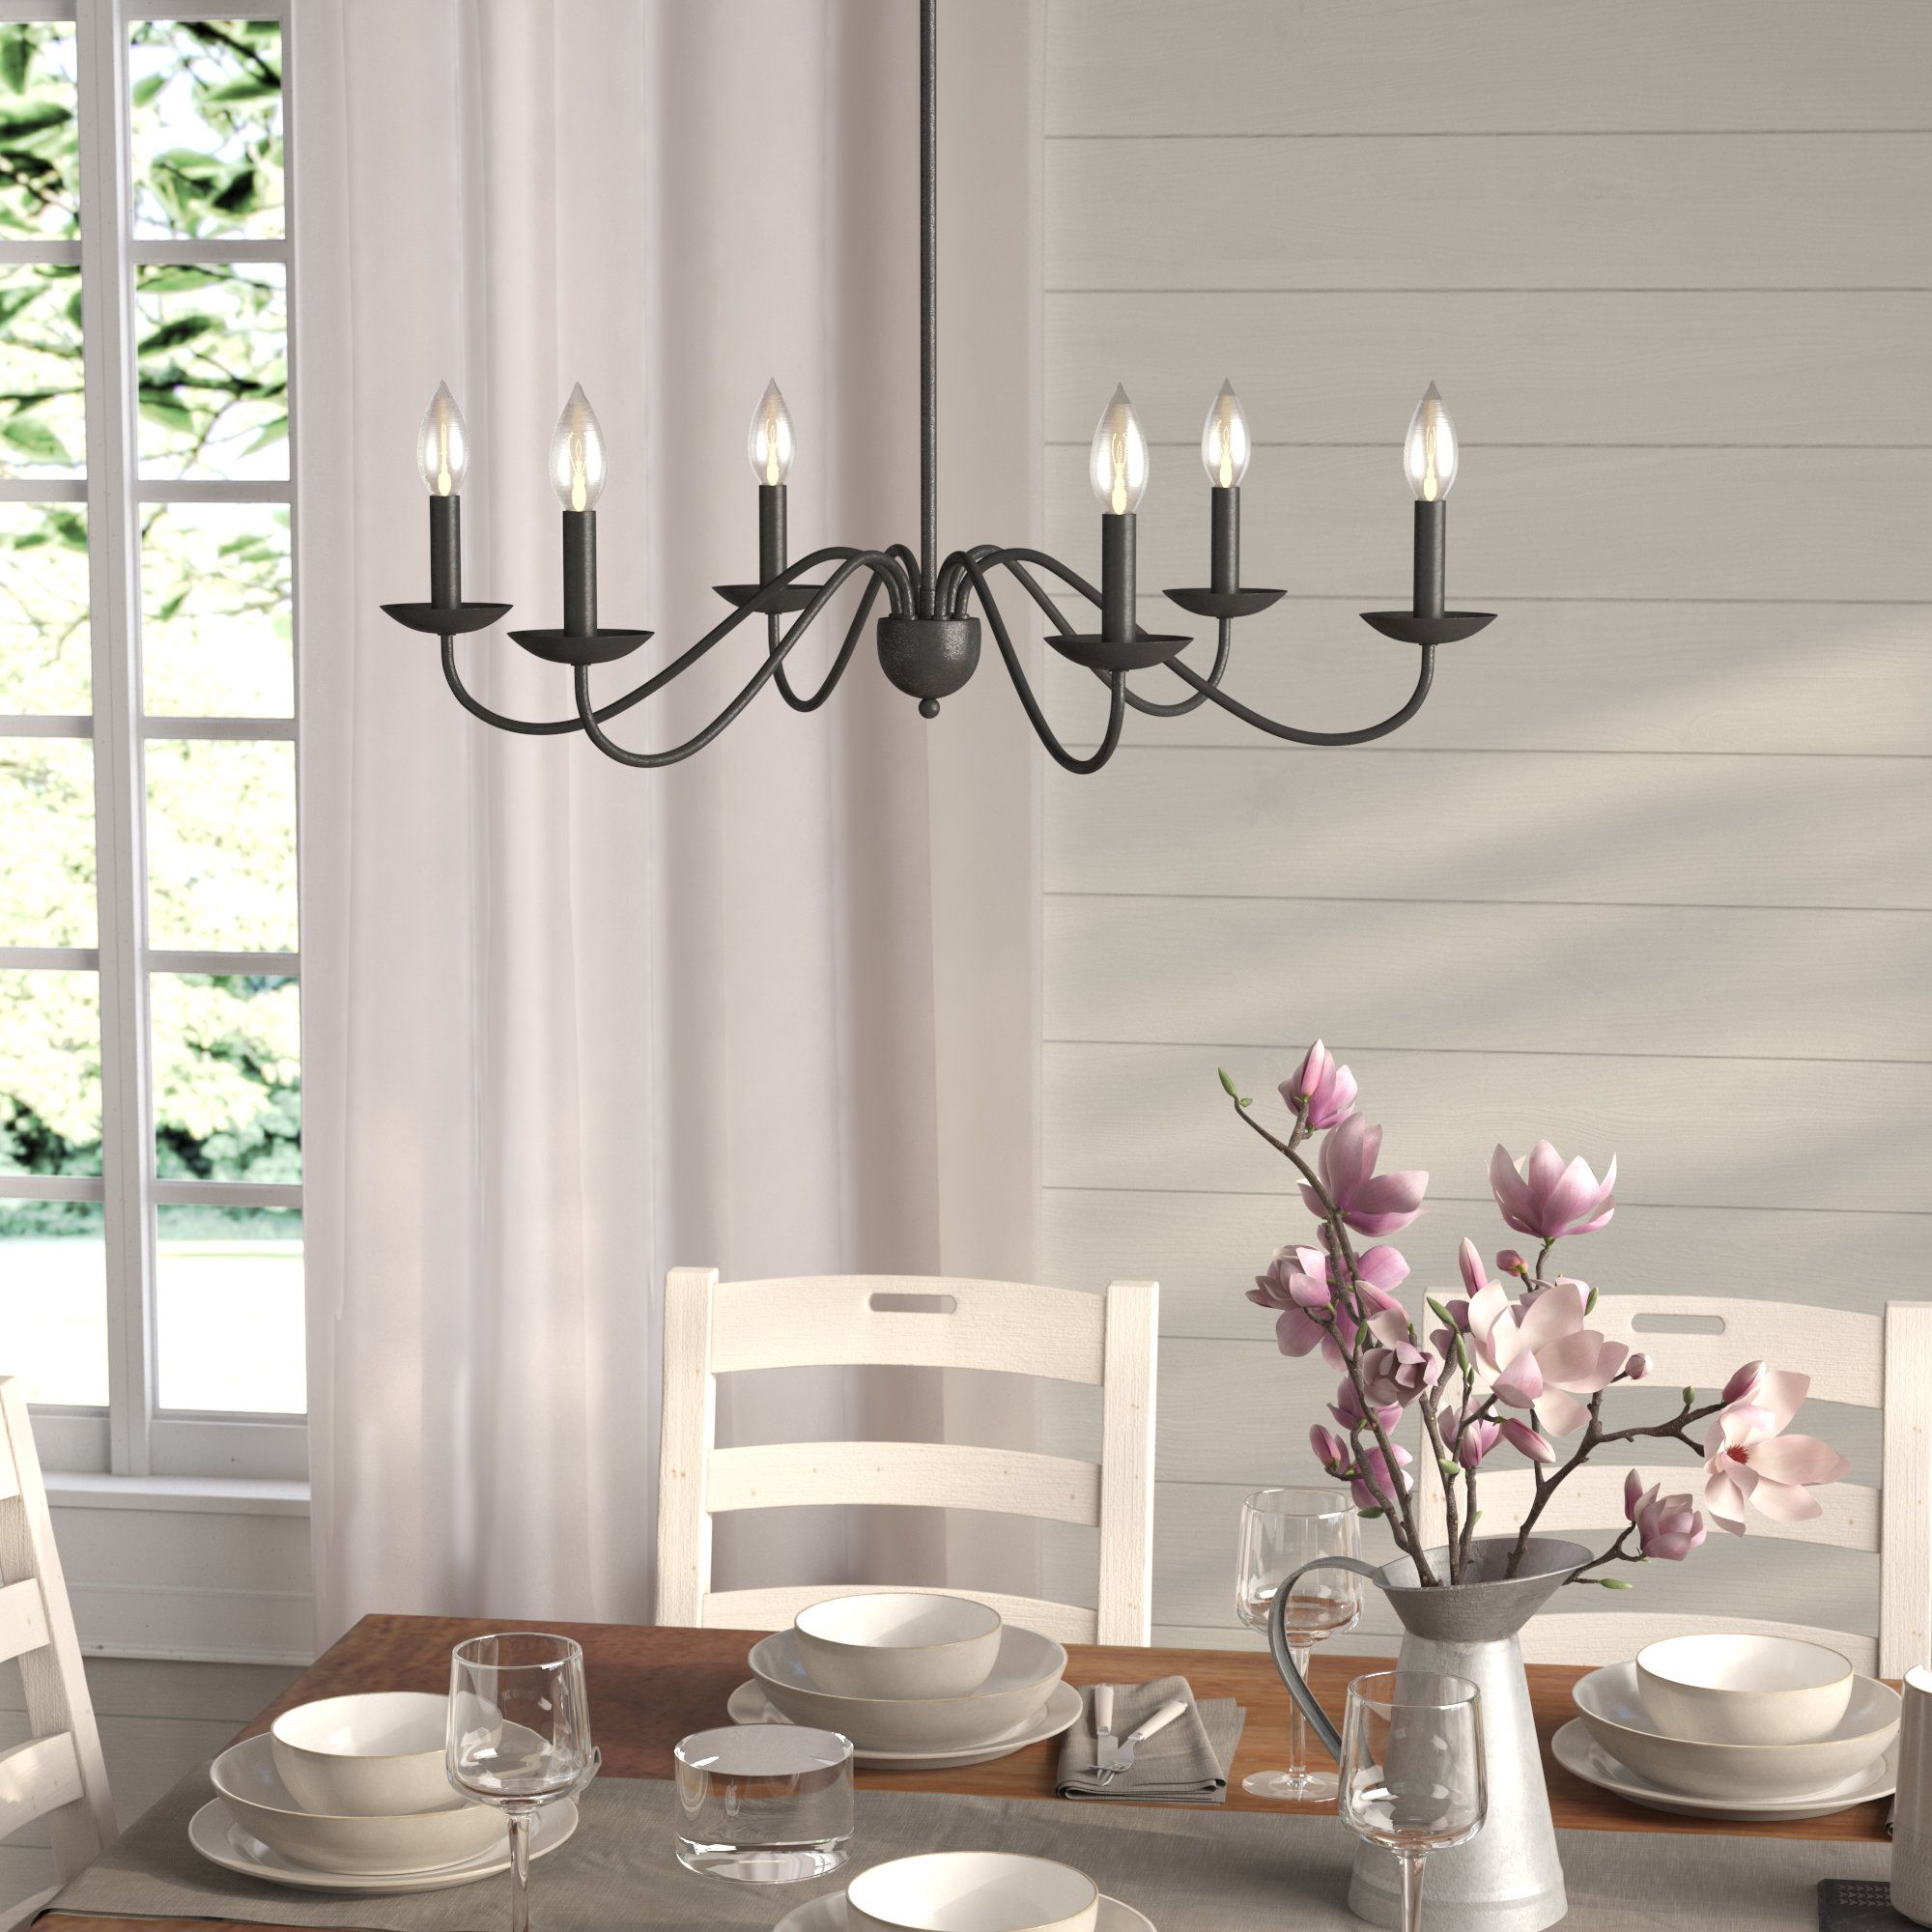 Perseus 6 Light Candle Style Chandelier With Most Current Perseus 6 Light Candle Style Chandeliers (View 2 of 25)